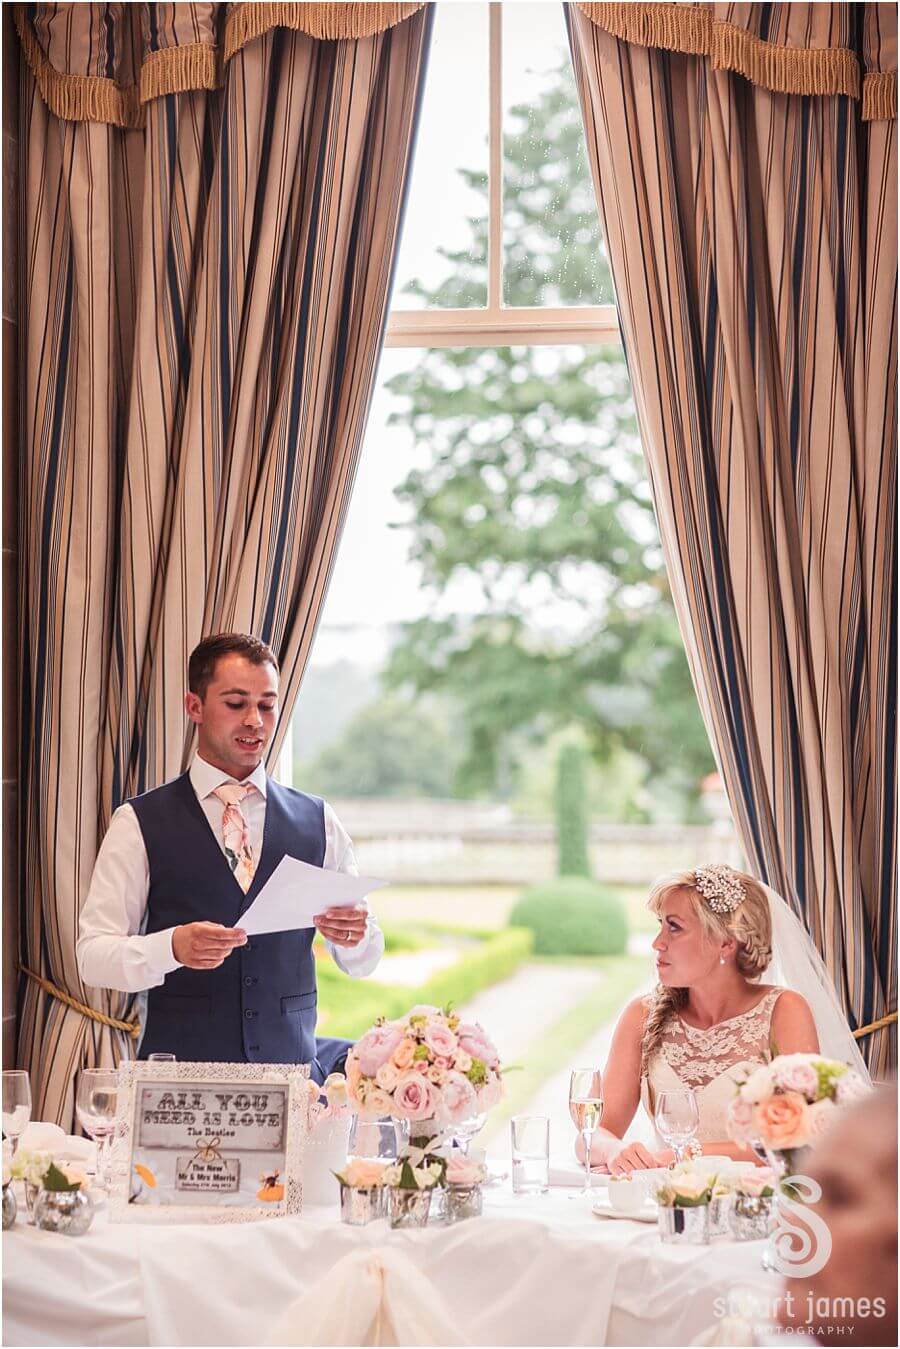 Unobtrusive photos of the wedding speeches and toasts at Weston Park in Staffordshire by Documentary Wedding Photographer Stuart James